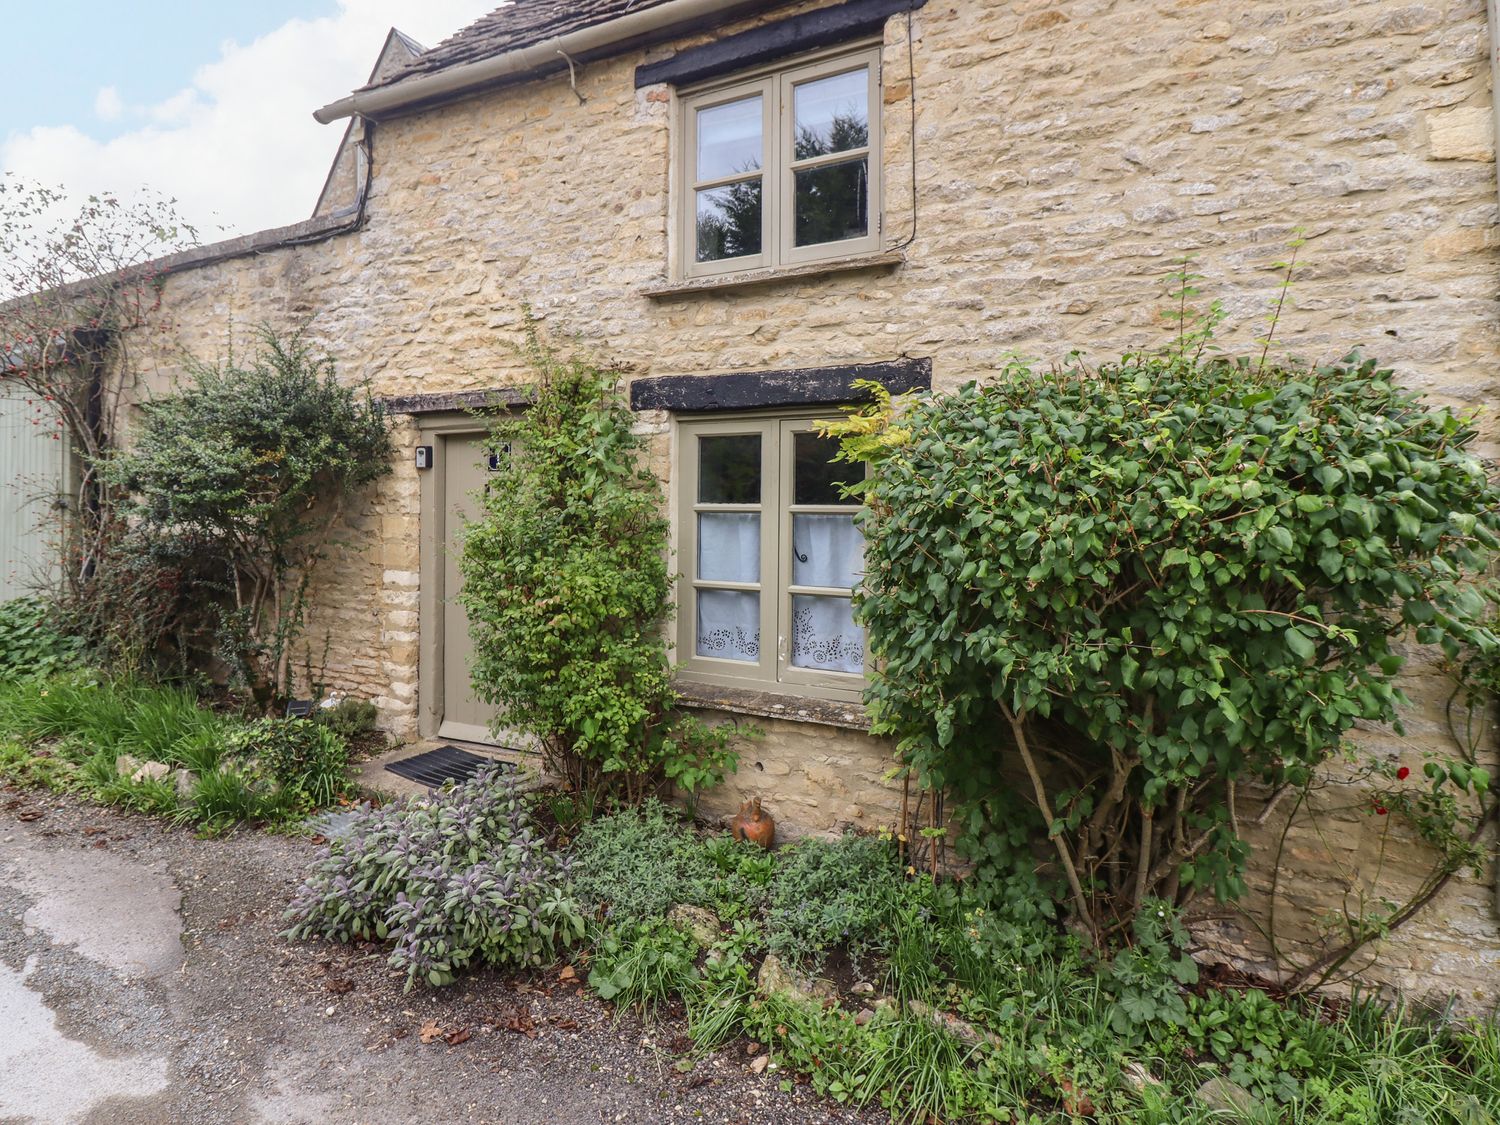 Cosy Cottage - Cotswolds - 1142675 - photo 1